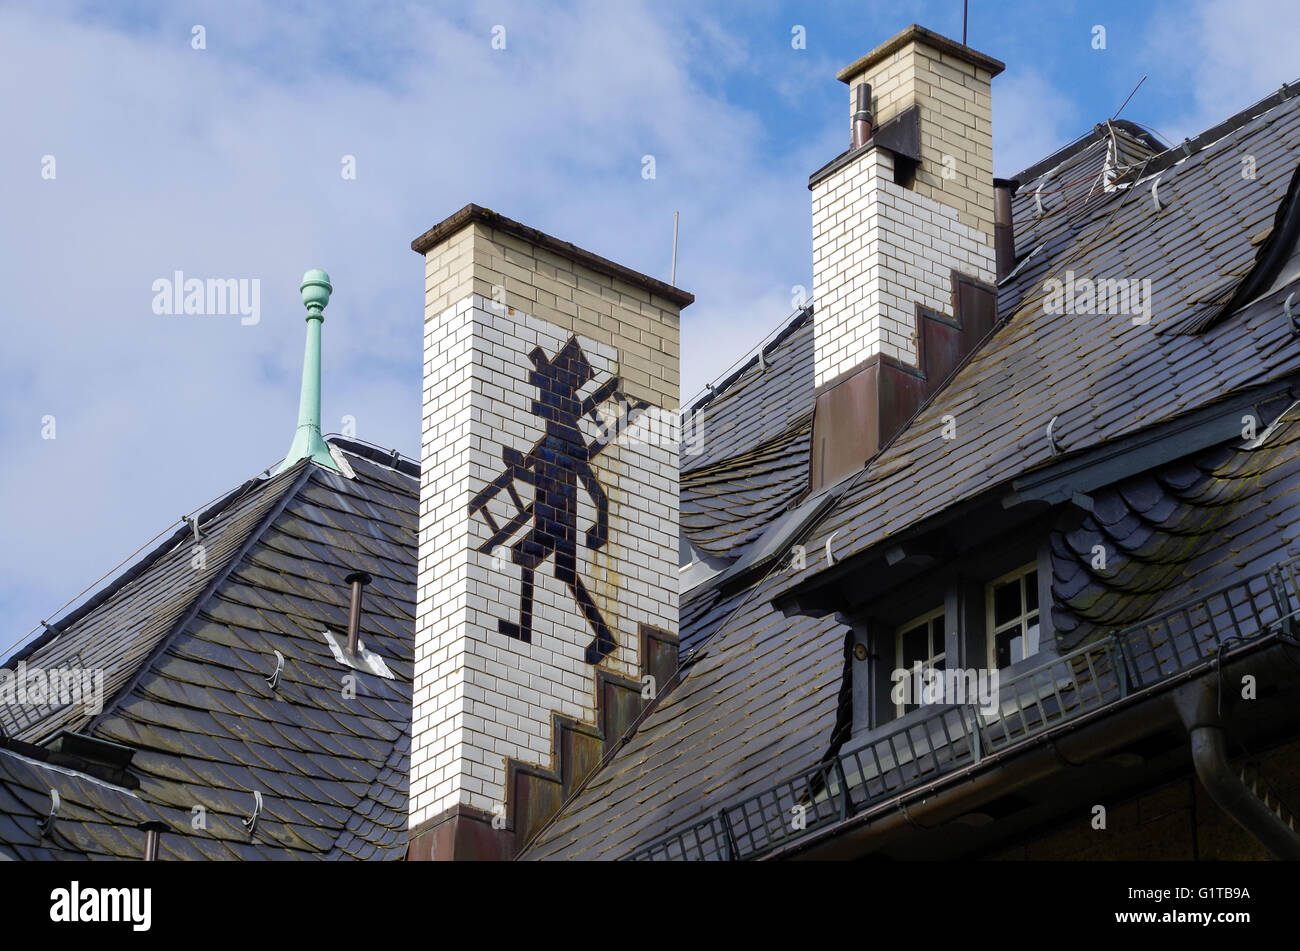 A Chimney Sweep drawn on the chimney in Baden-Baden, Germany Stock Photo